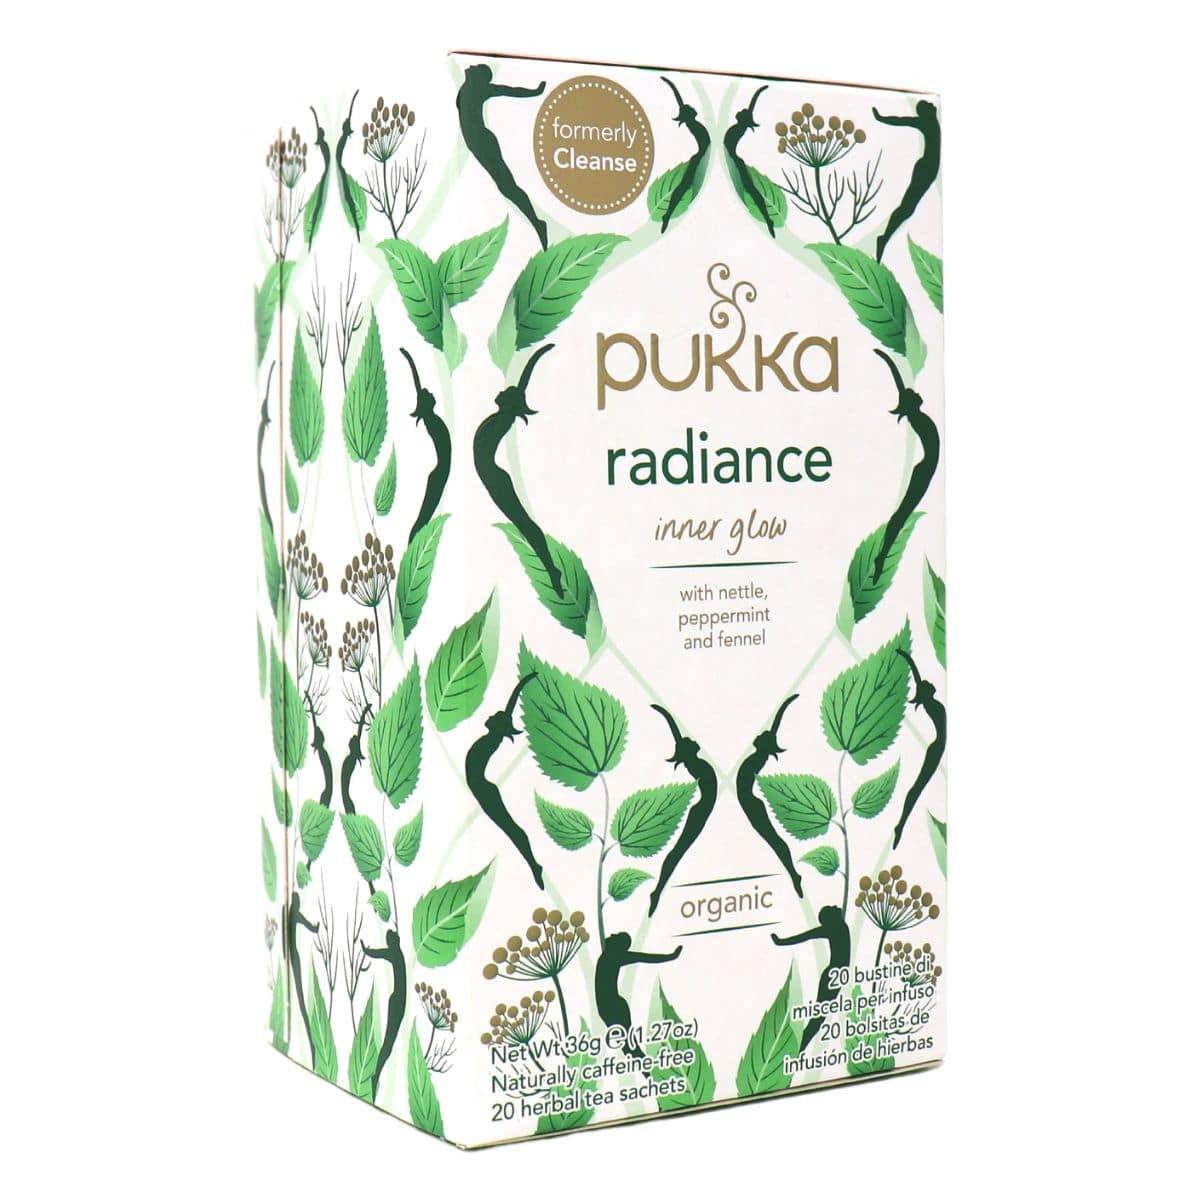 Pukka Radiance (Formerly Cleanse) Tea 20 Bags